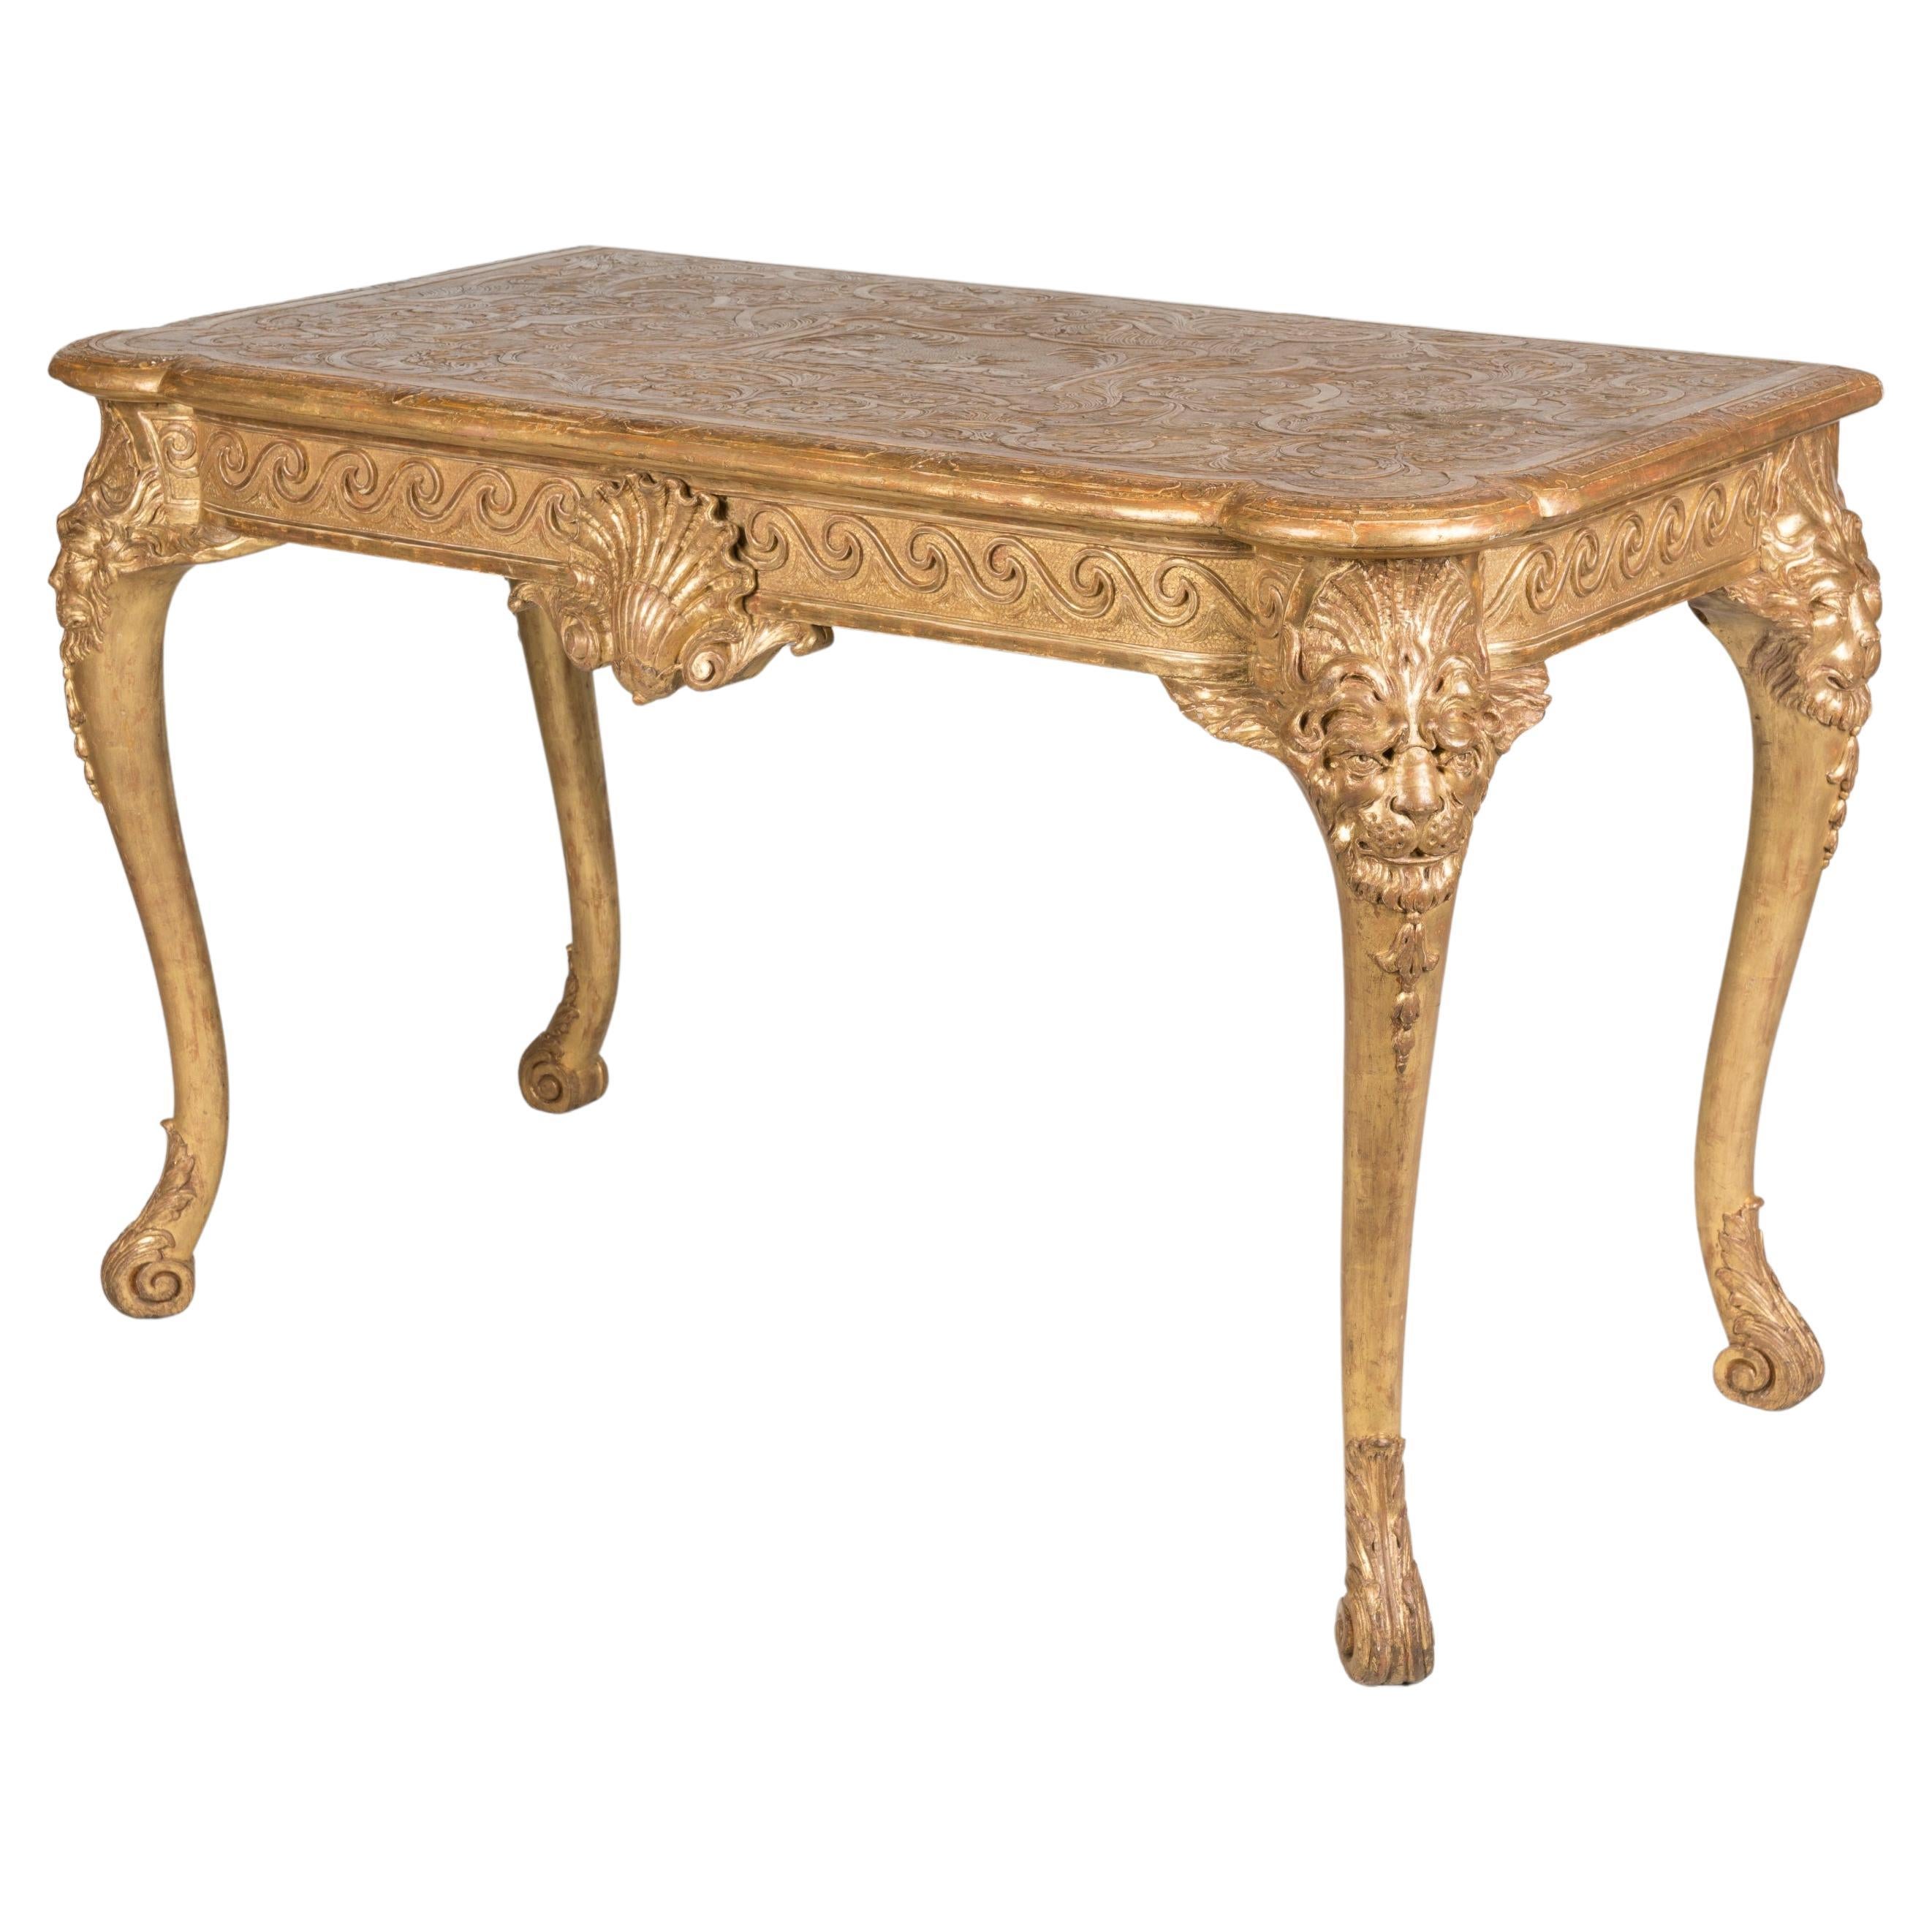 19th Century English Gilt Gesso Console Table in the Early Georgian Style For Sale